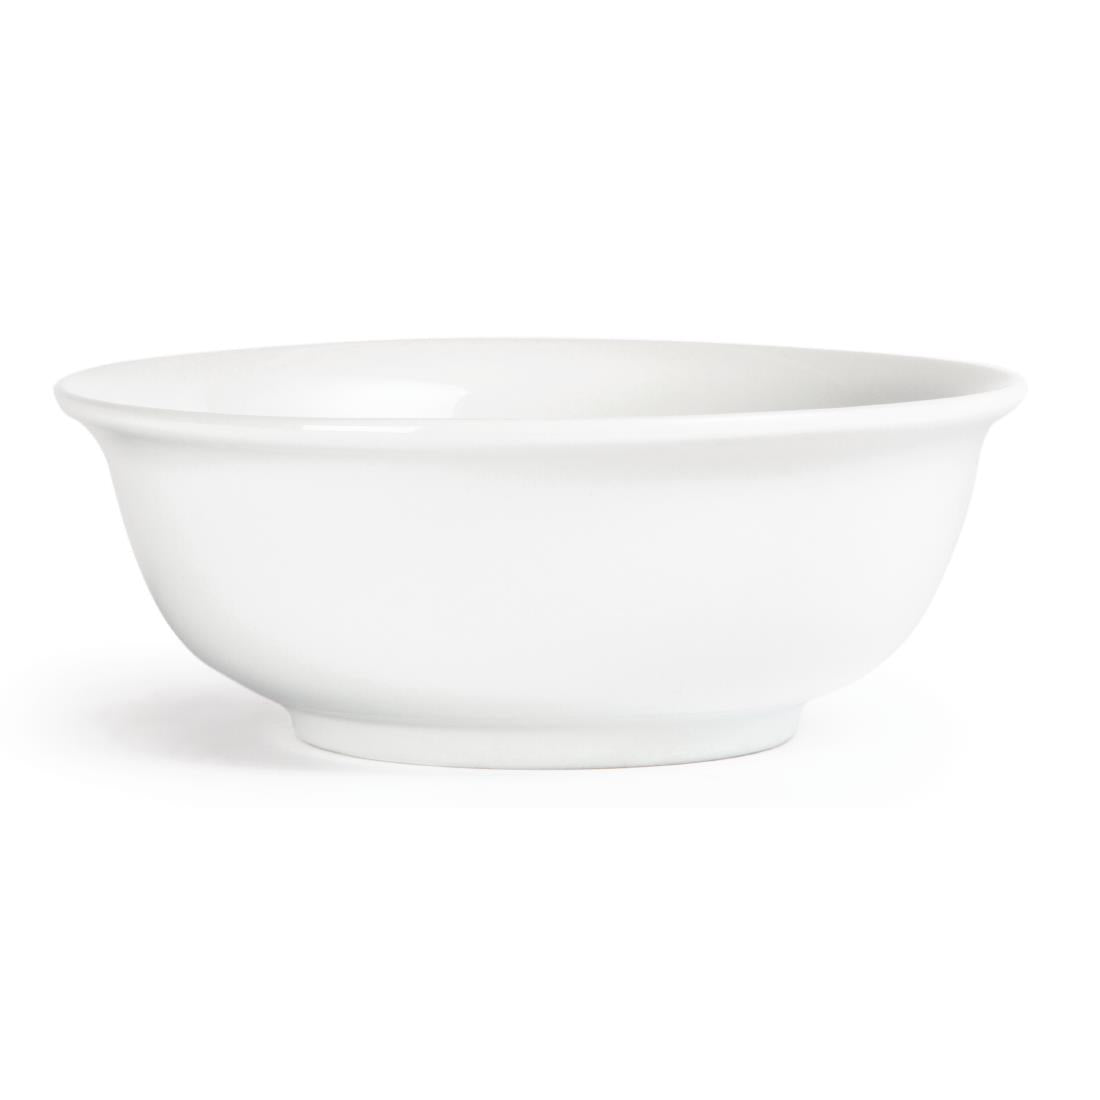 W428 Olympia Whiteware Salad Bowls 200mm (Pack of 6)